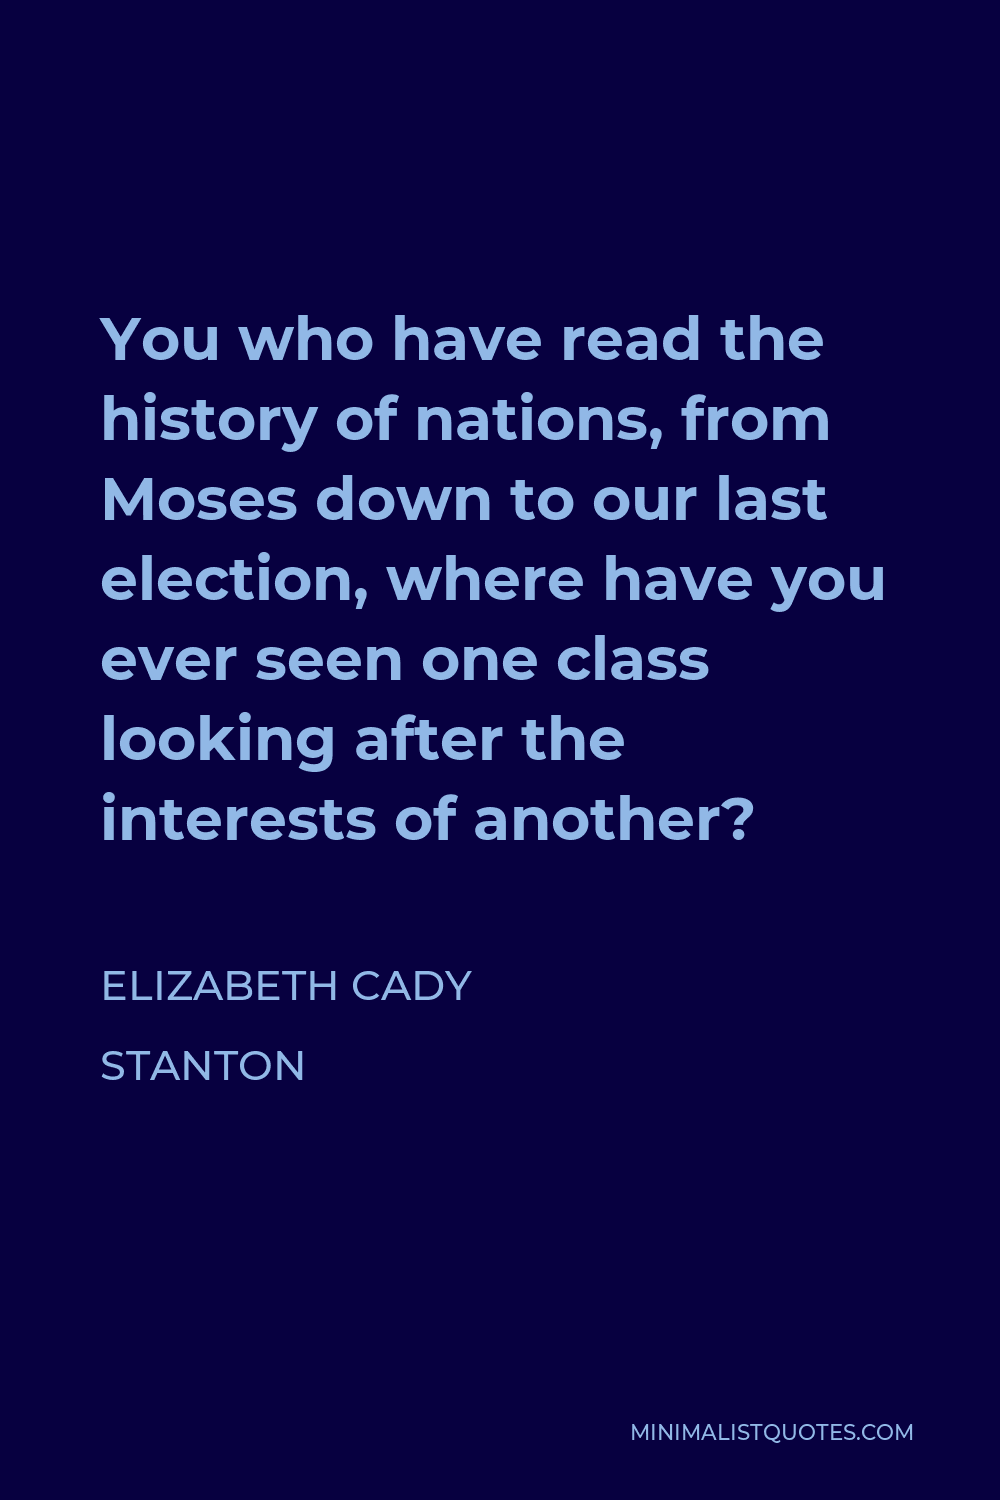 Elizabeth Cady Stanton Quote - You who have read the history of nations, from Moses down to our last election, where have you ever seen one class looking after the interests of another?